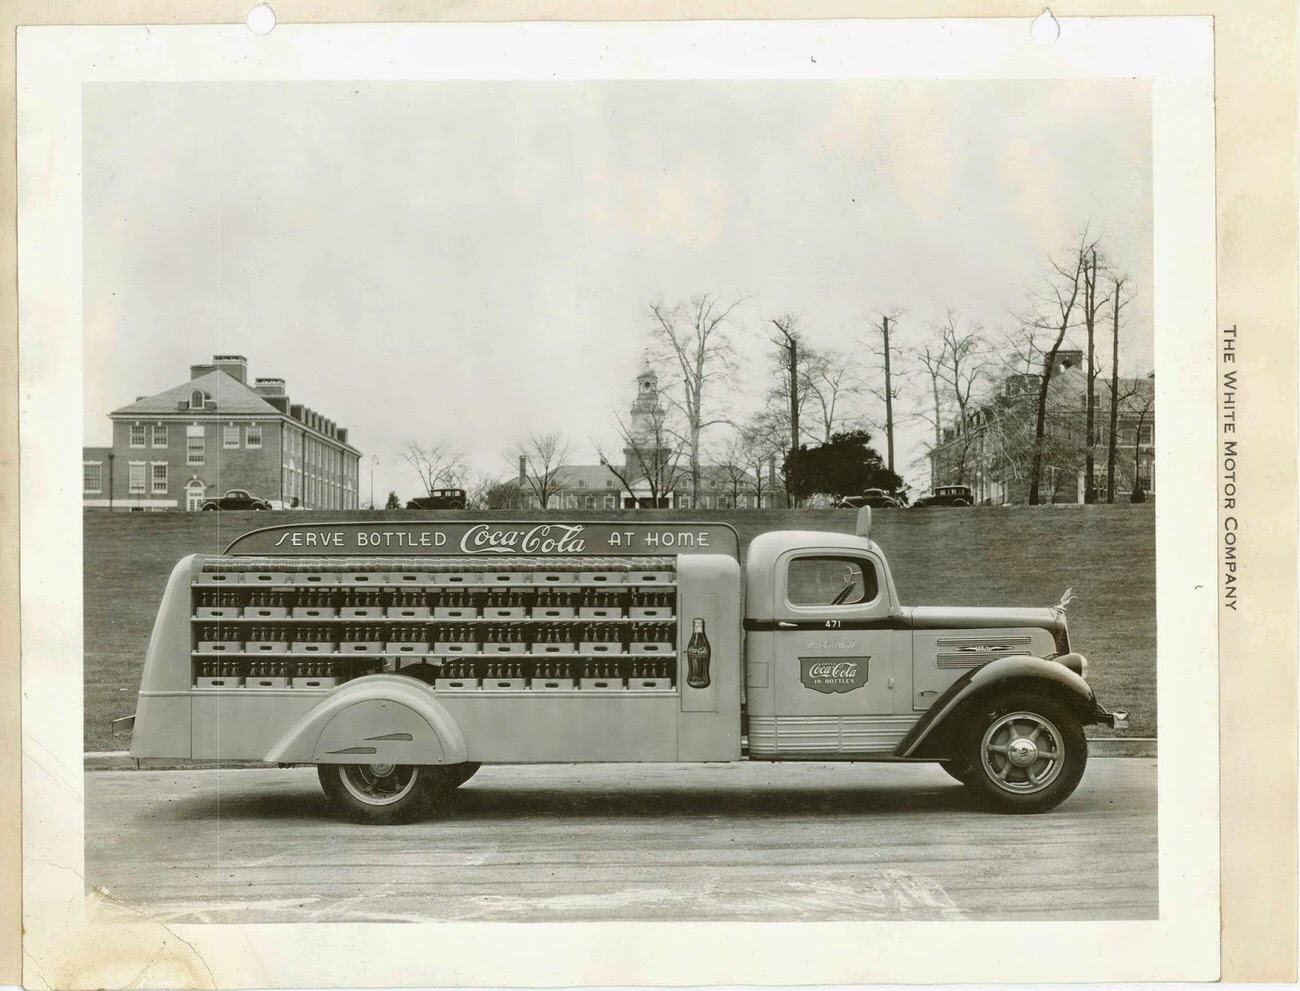 A 1936 sales booklet photo of a Model 704 delivery truck from The White Motor Company.